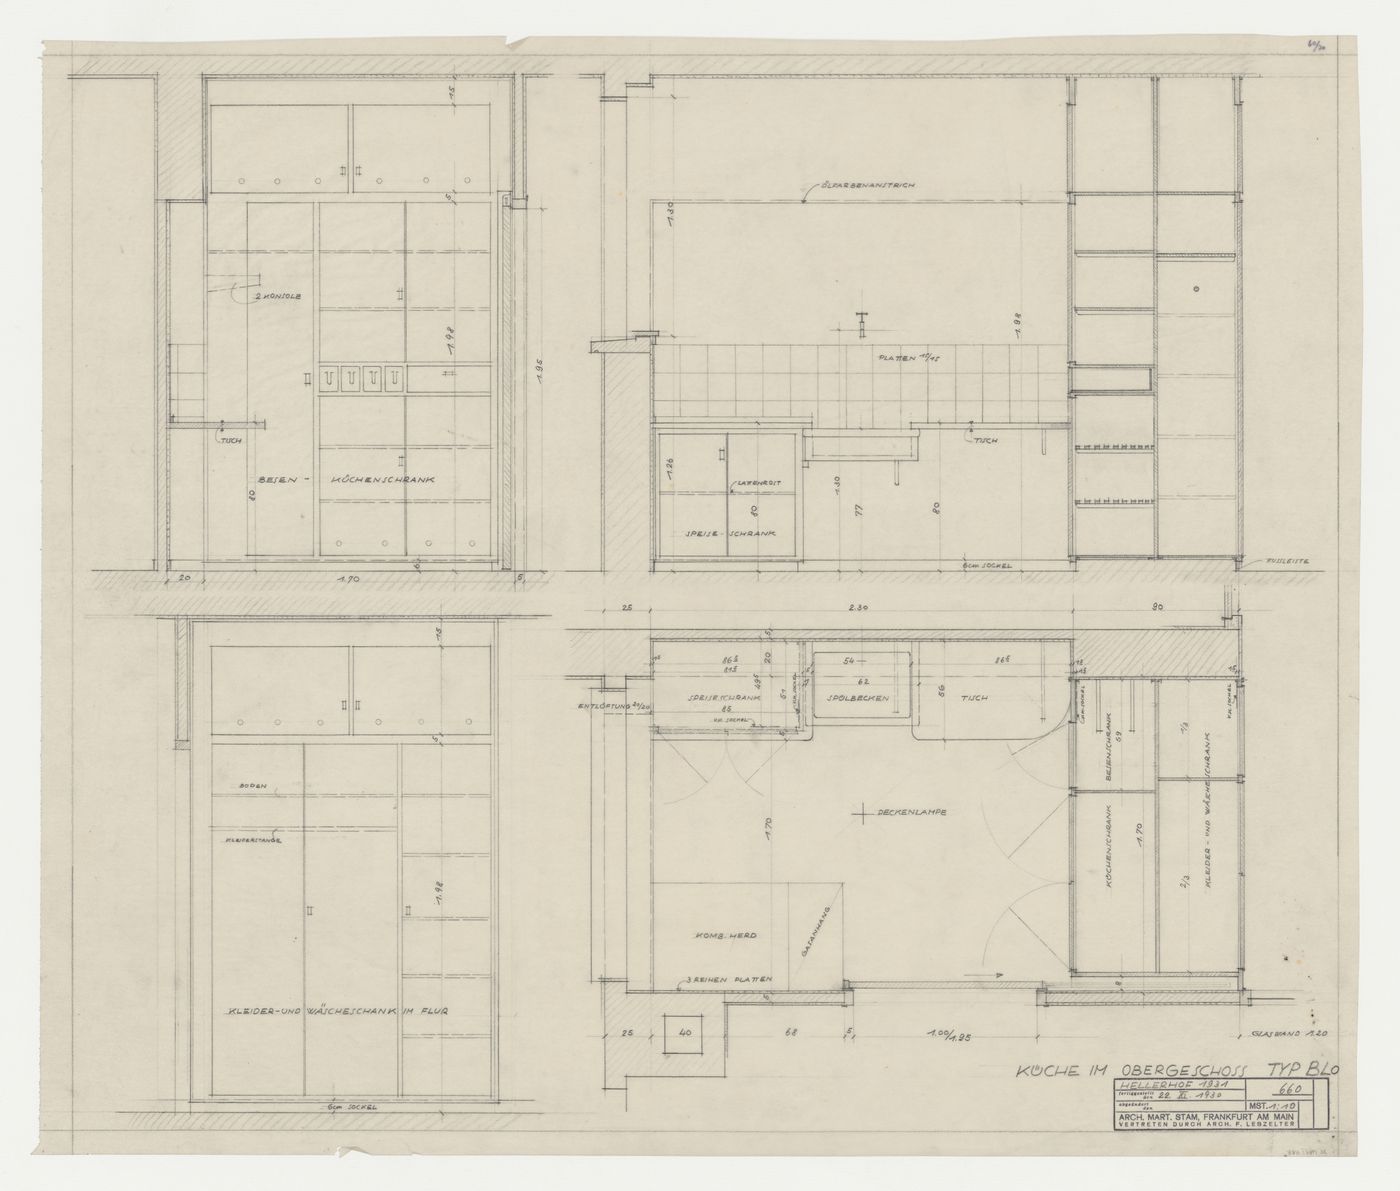 First floor plan and elevations for a type BLO kitchen for a housing unit, Hellerhof Housing Estate, Frankfurt am Main, Germany